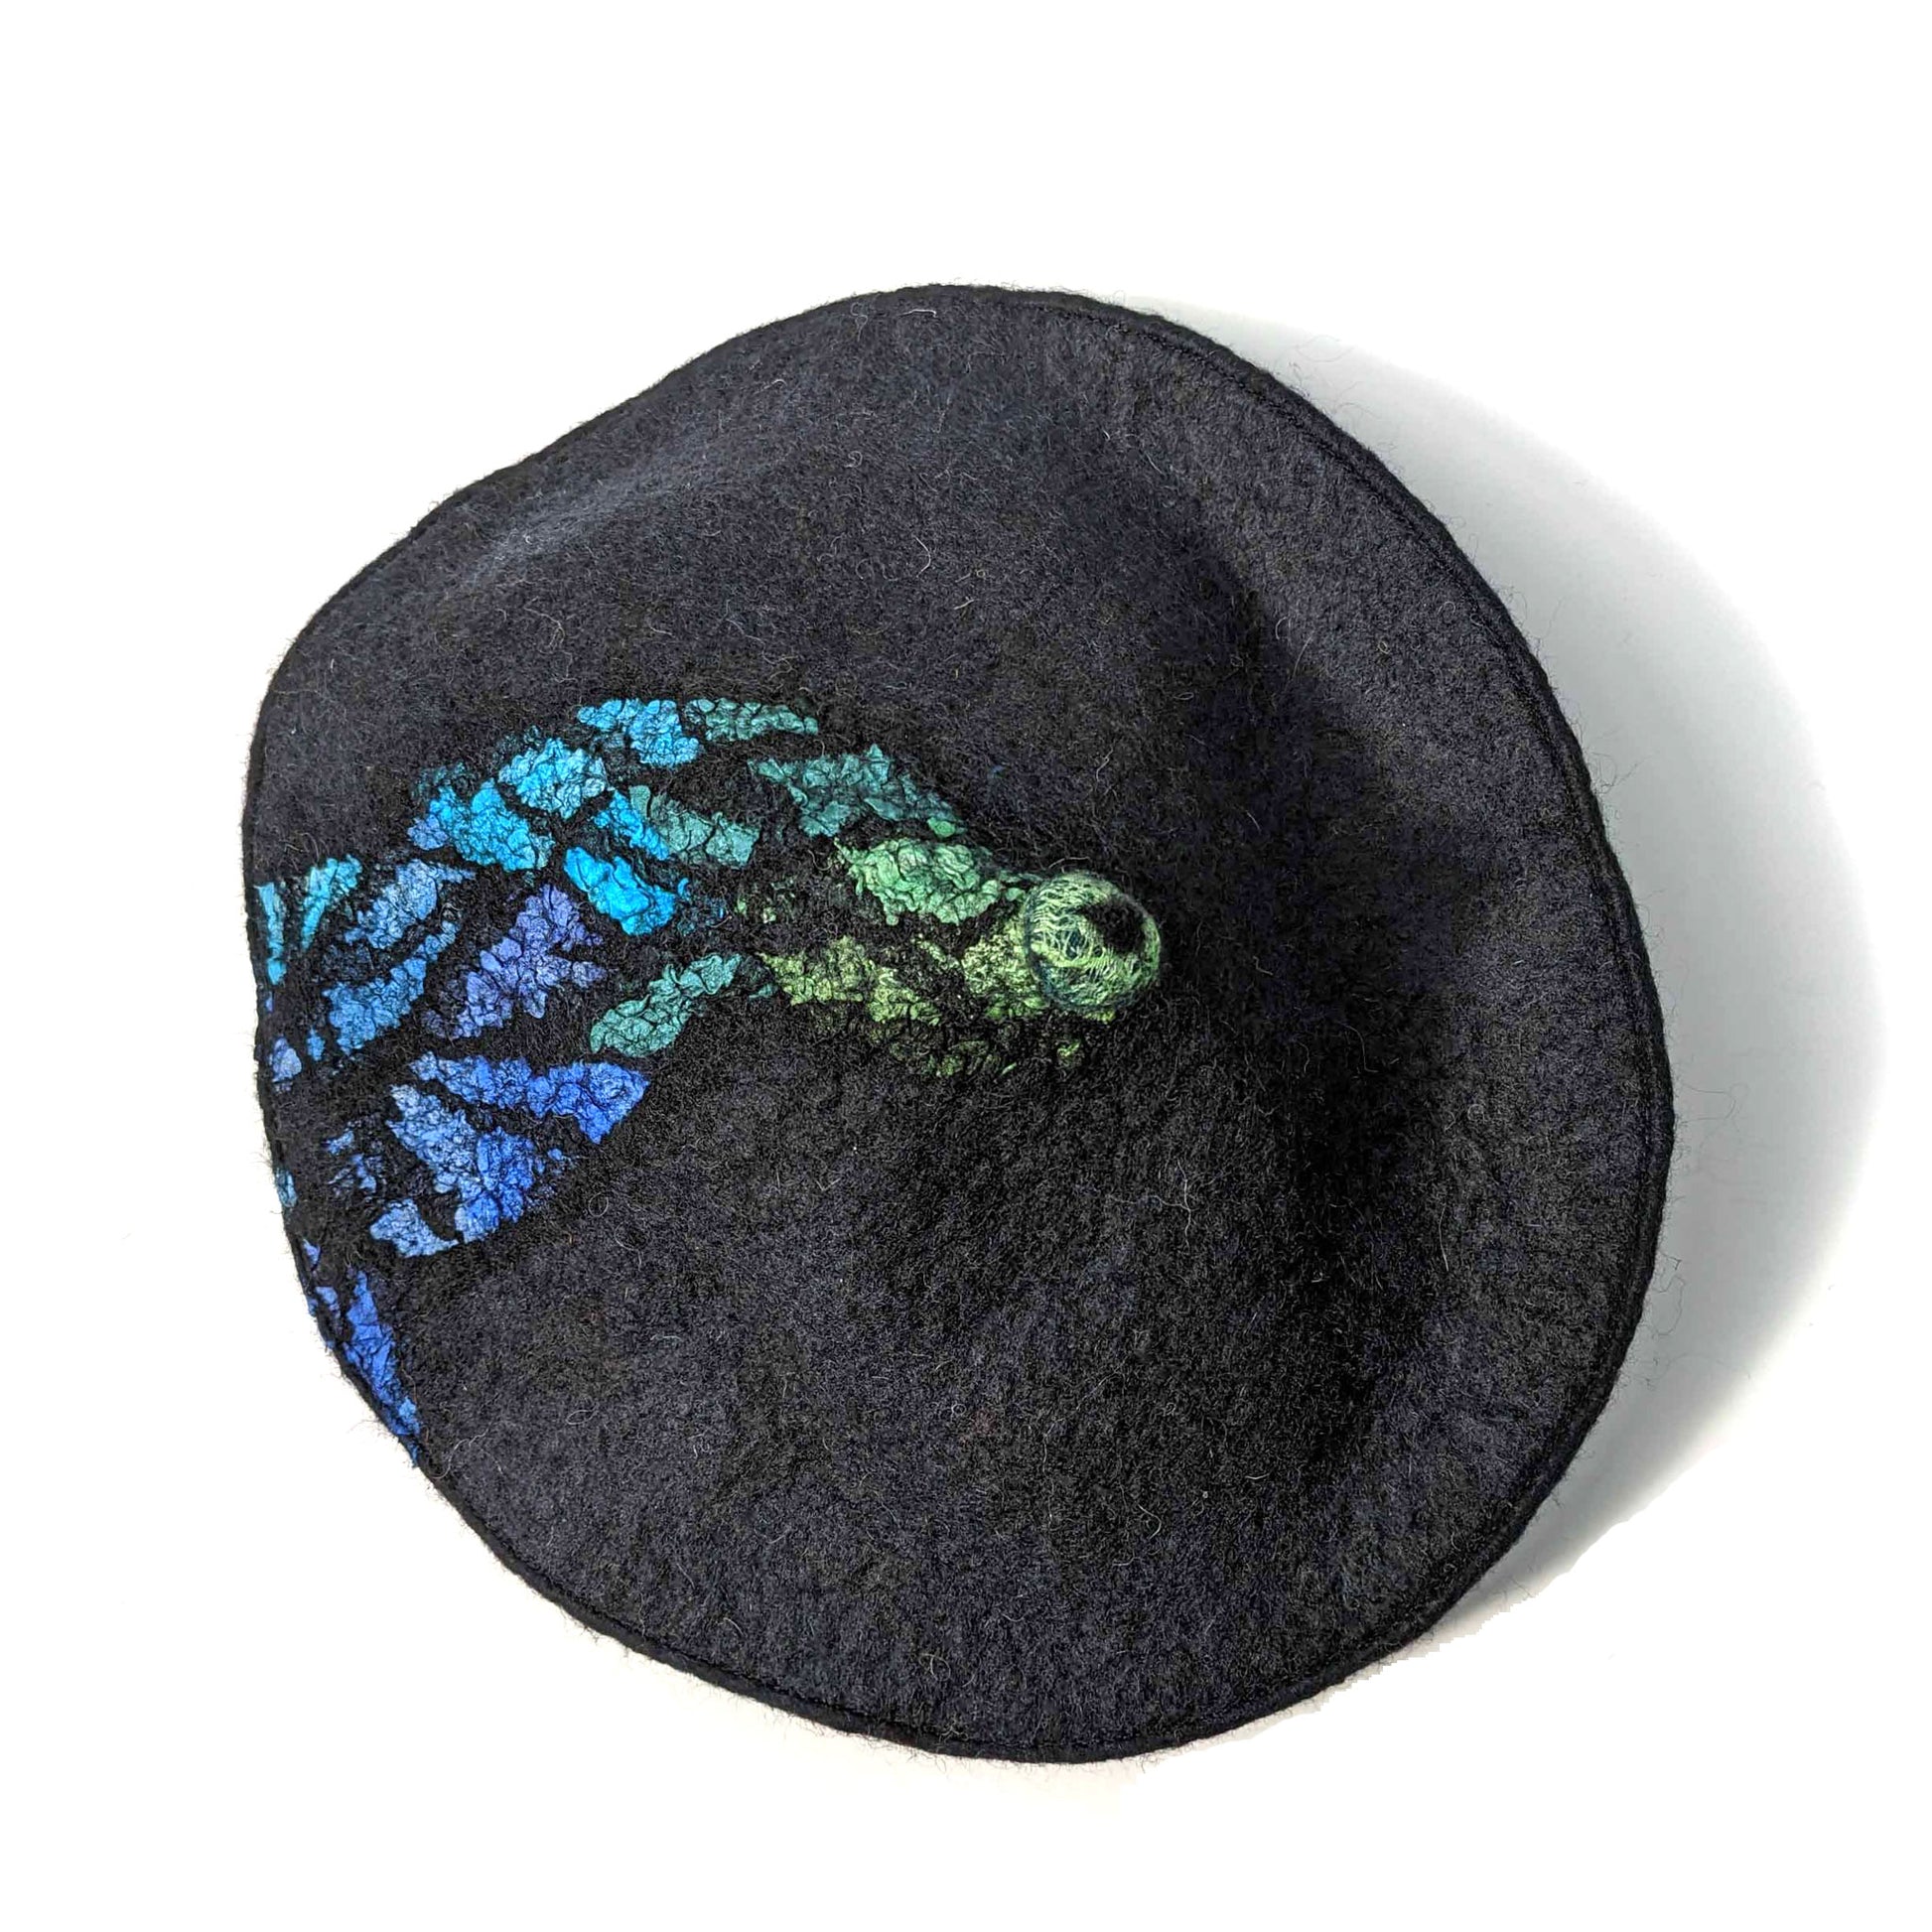 Stained Glass Inspired Felted Black Beret with Cool Colored Swirl - topview